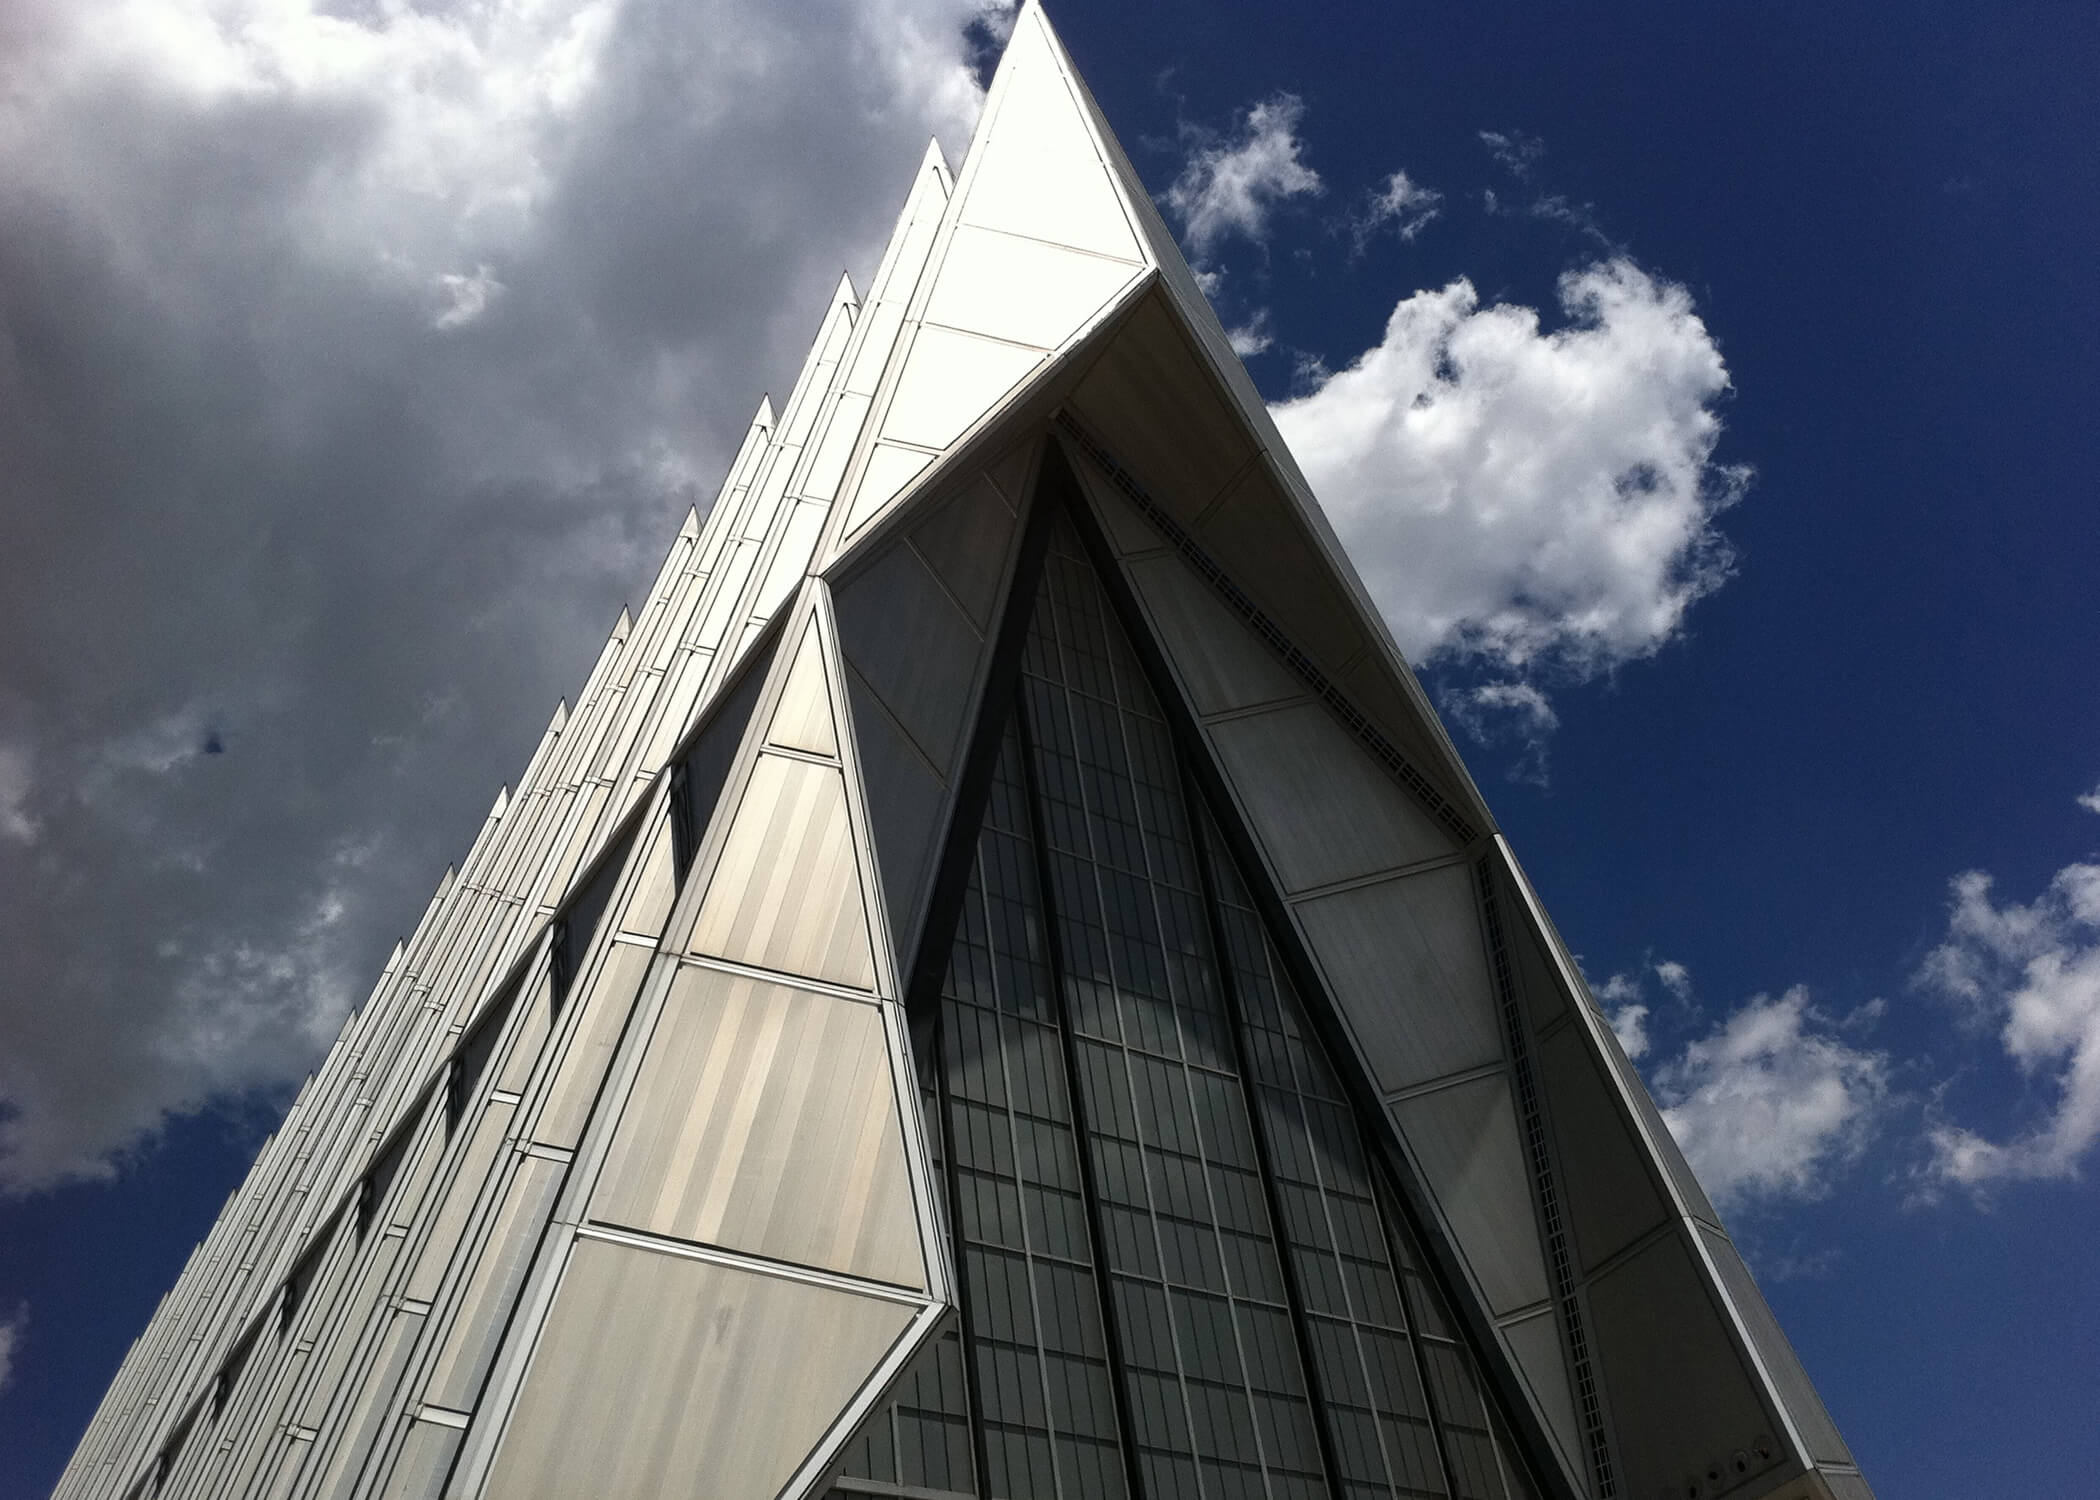 Image of the spires atop the cadet chapel at the U.S. Air Force Academy.